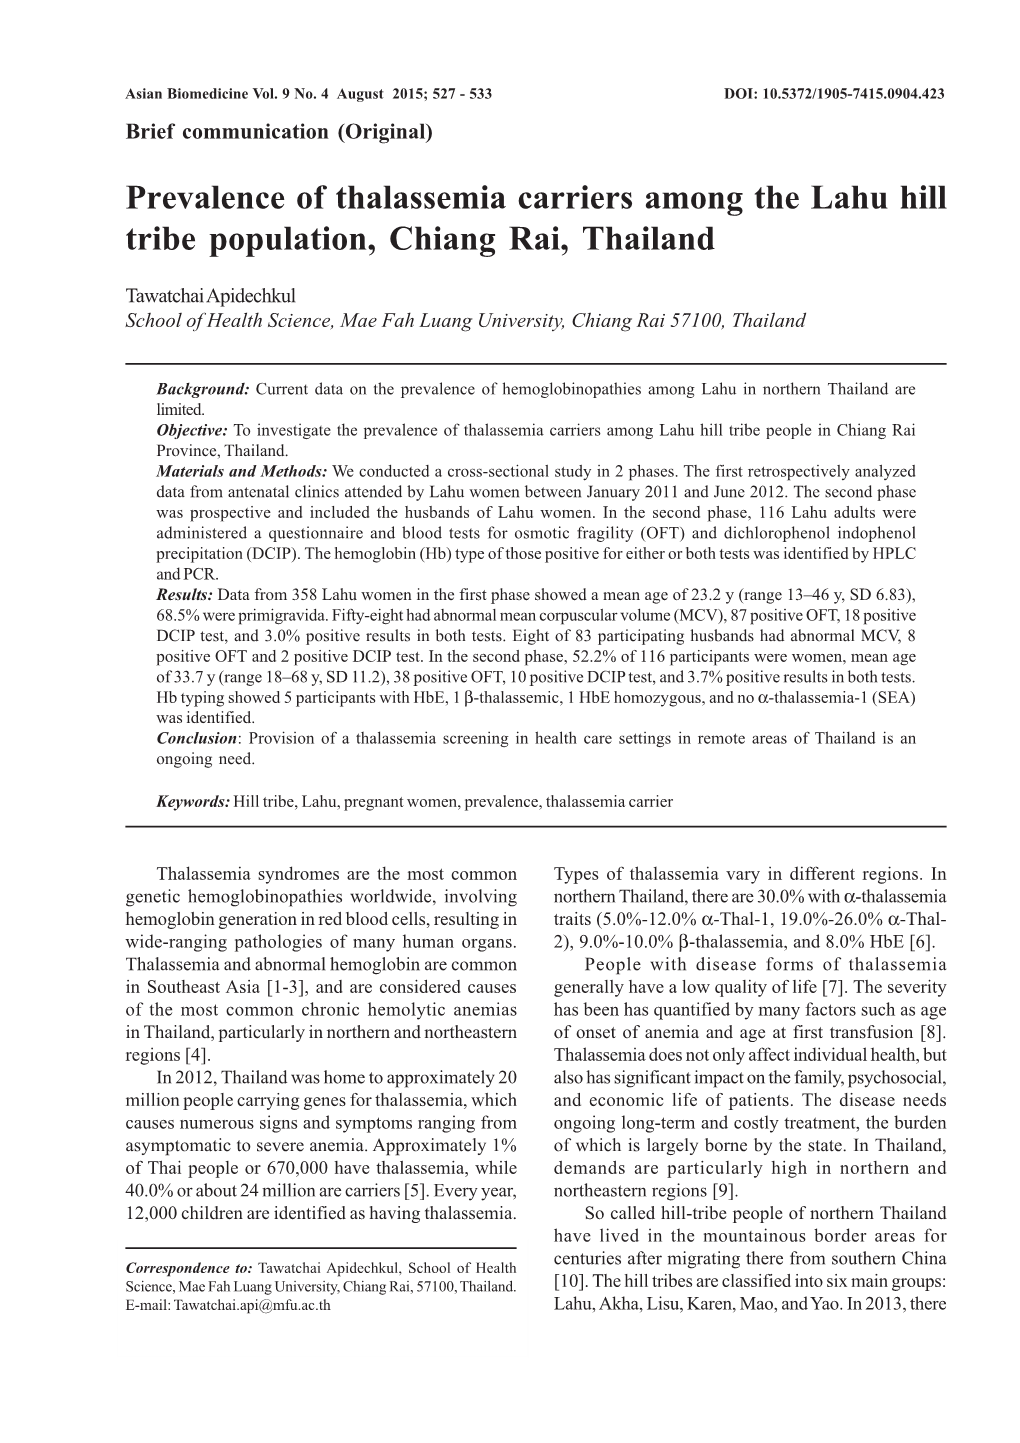 Prevalence of Thalassemia Carriers Among the Lahu Hill Tribe Population, Chiang Rai, Thailand